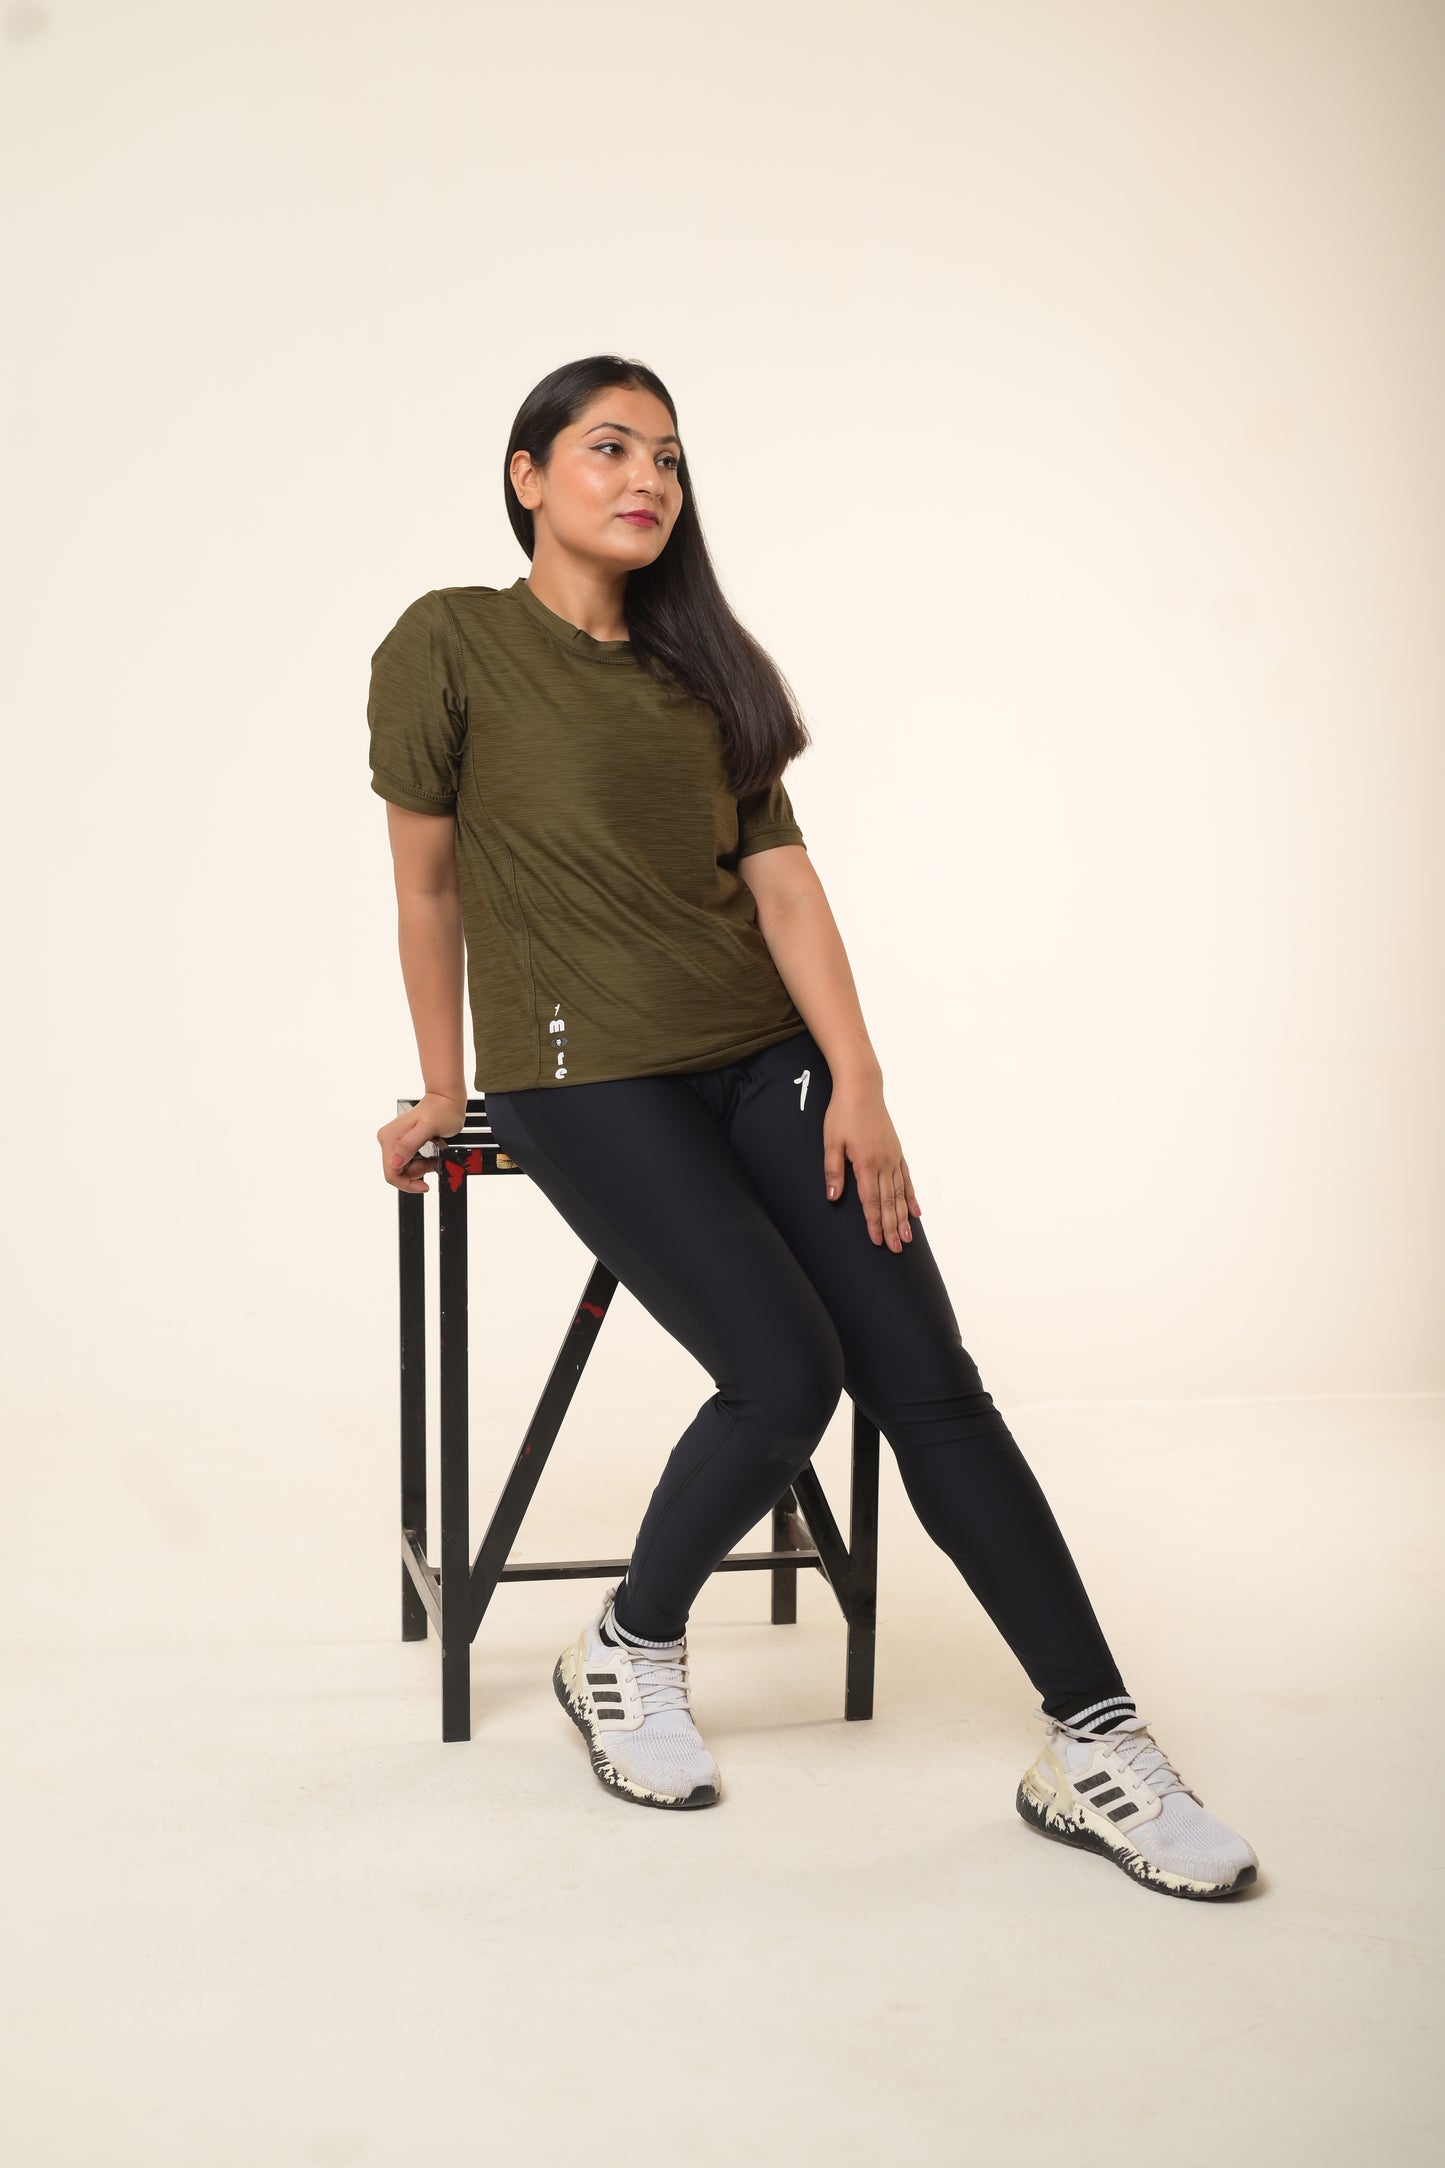 Dry fit olive green tee shirt